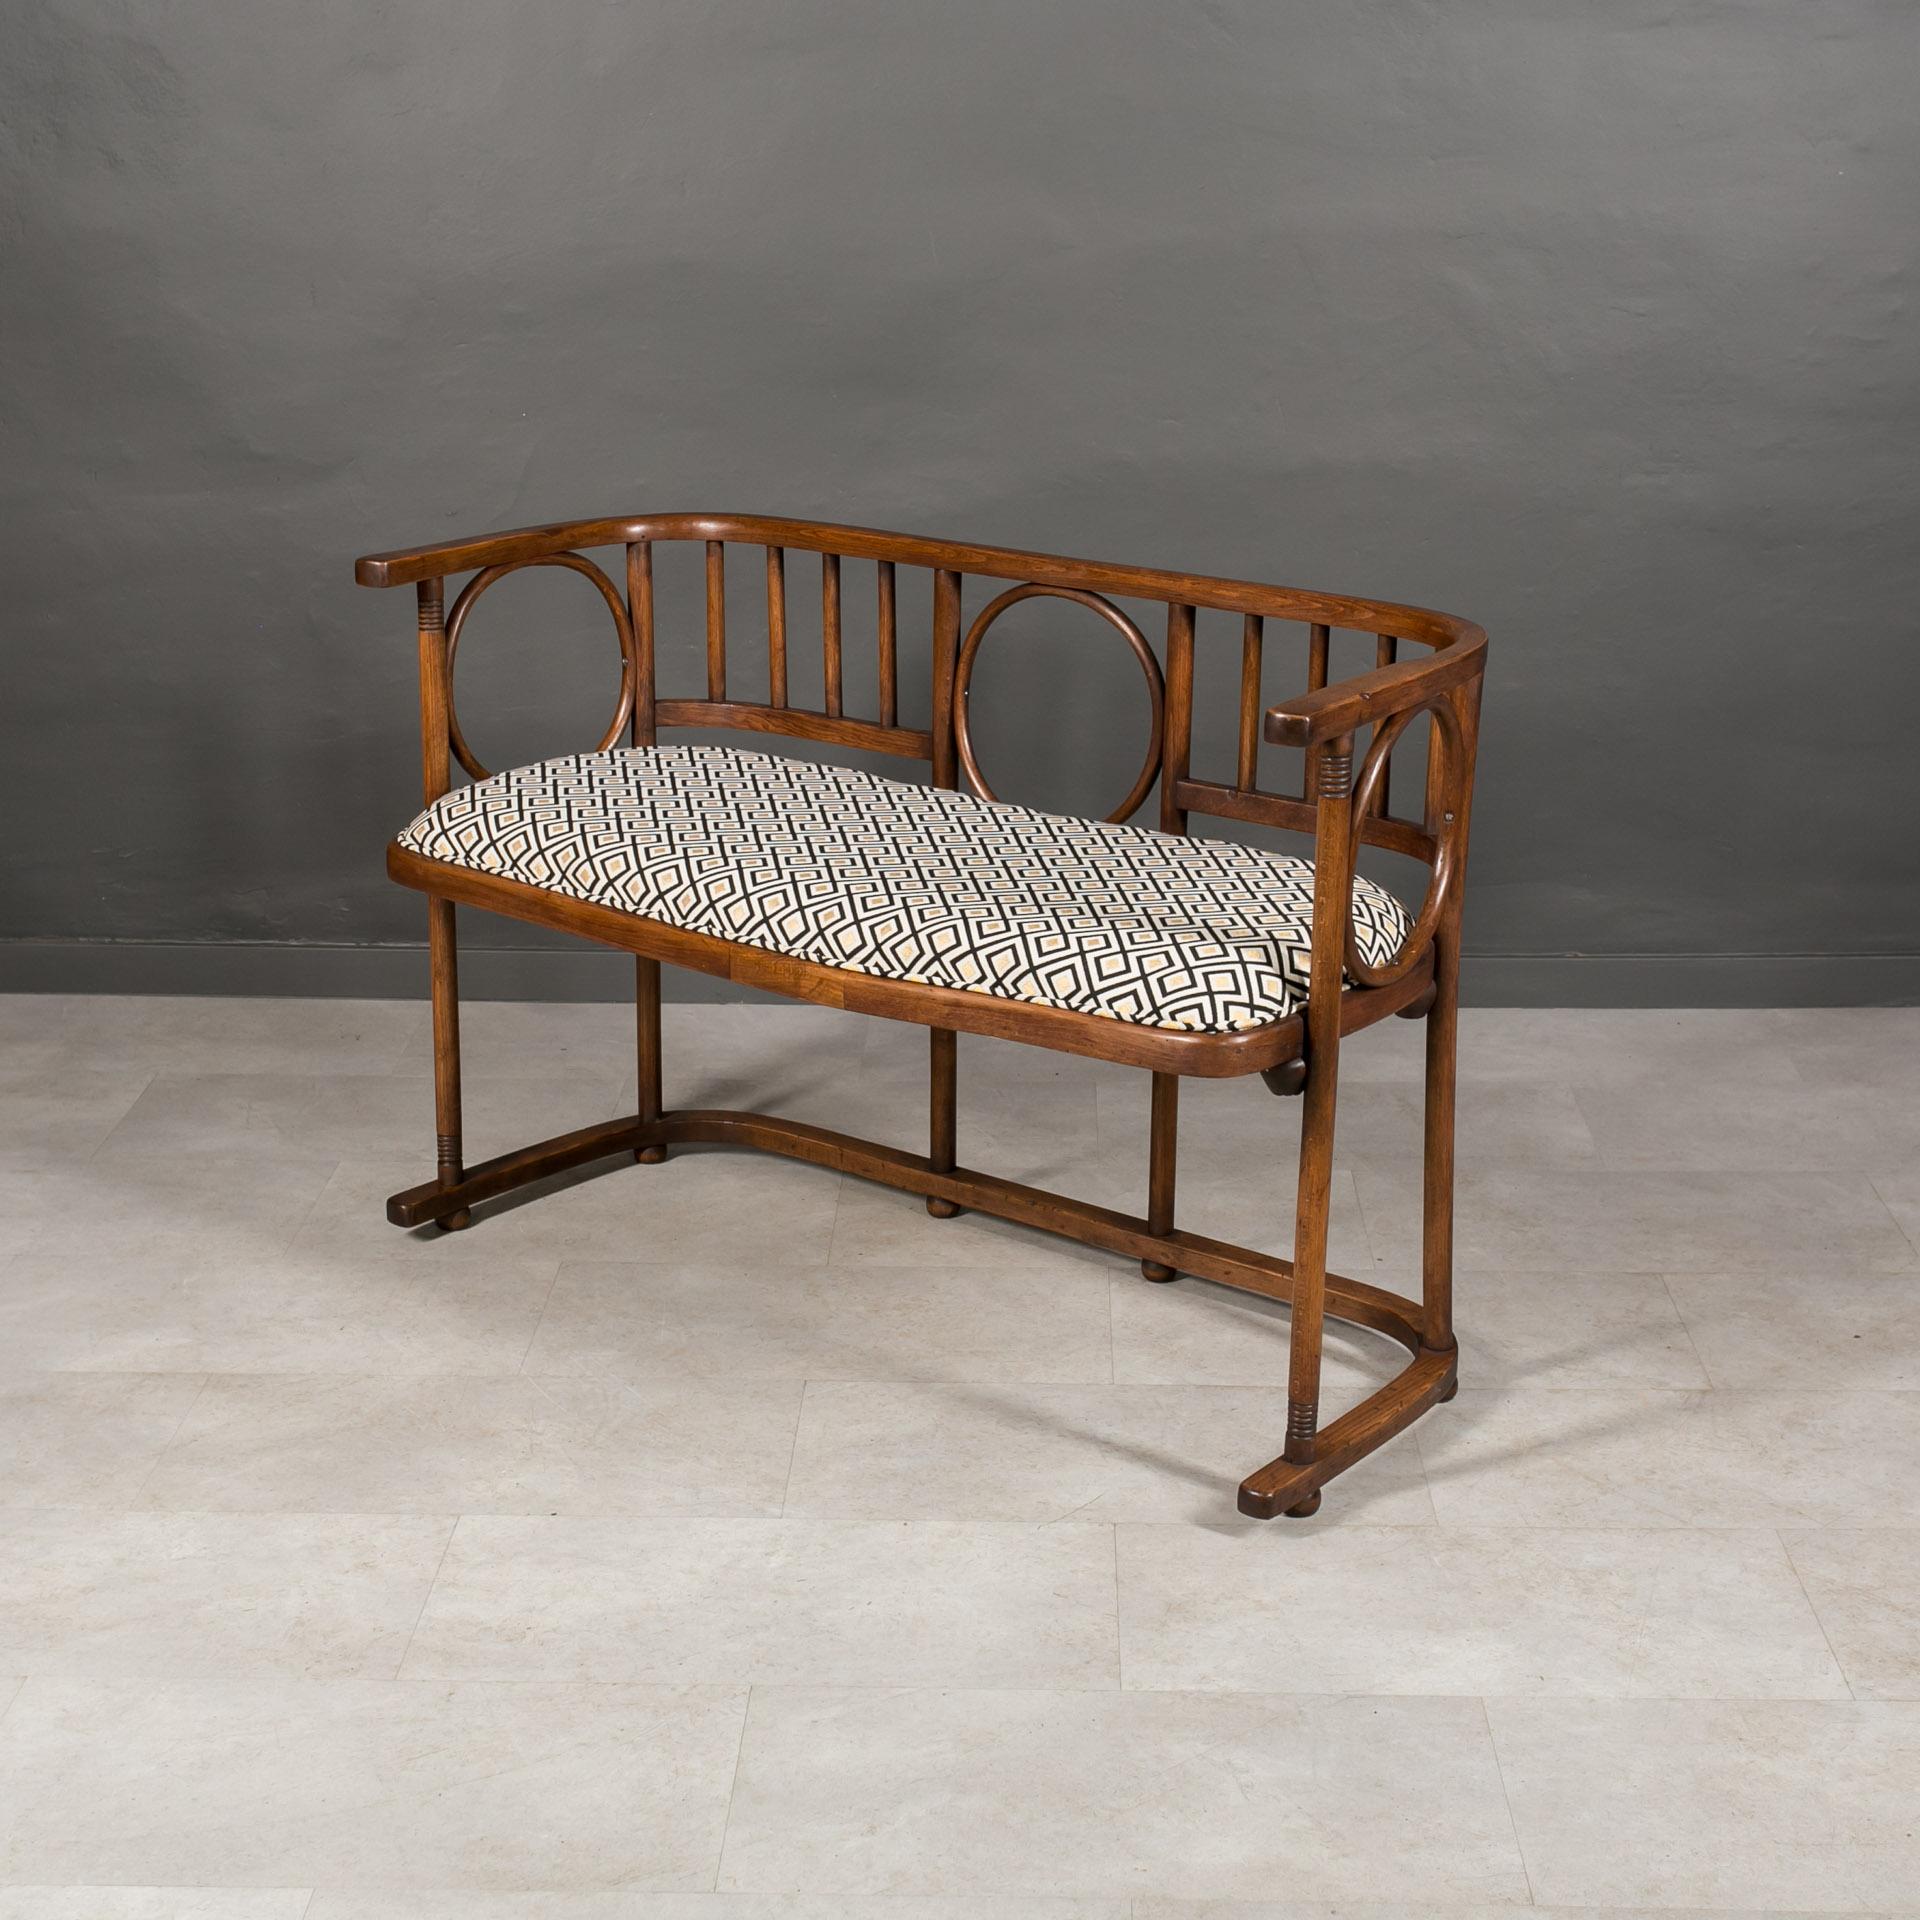 This exceptional bentwood bench settee was made in early 20th century and is attributed to Josef Hoffmann designed for Thonet - Mundus. This model appeared in the catalog in 1907, and was then compared to the more common J. & J. Kohn model, however